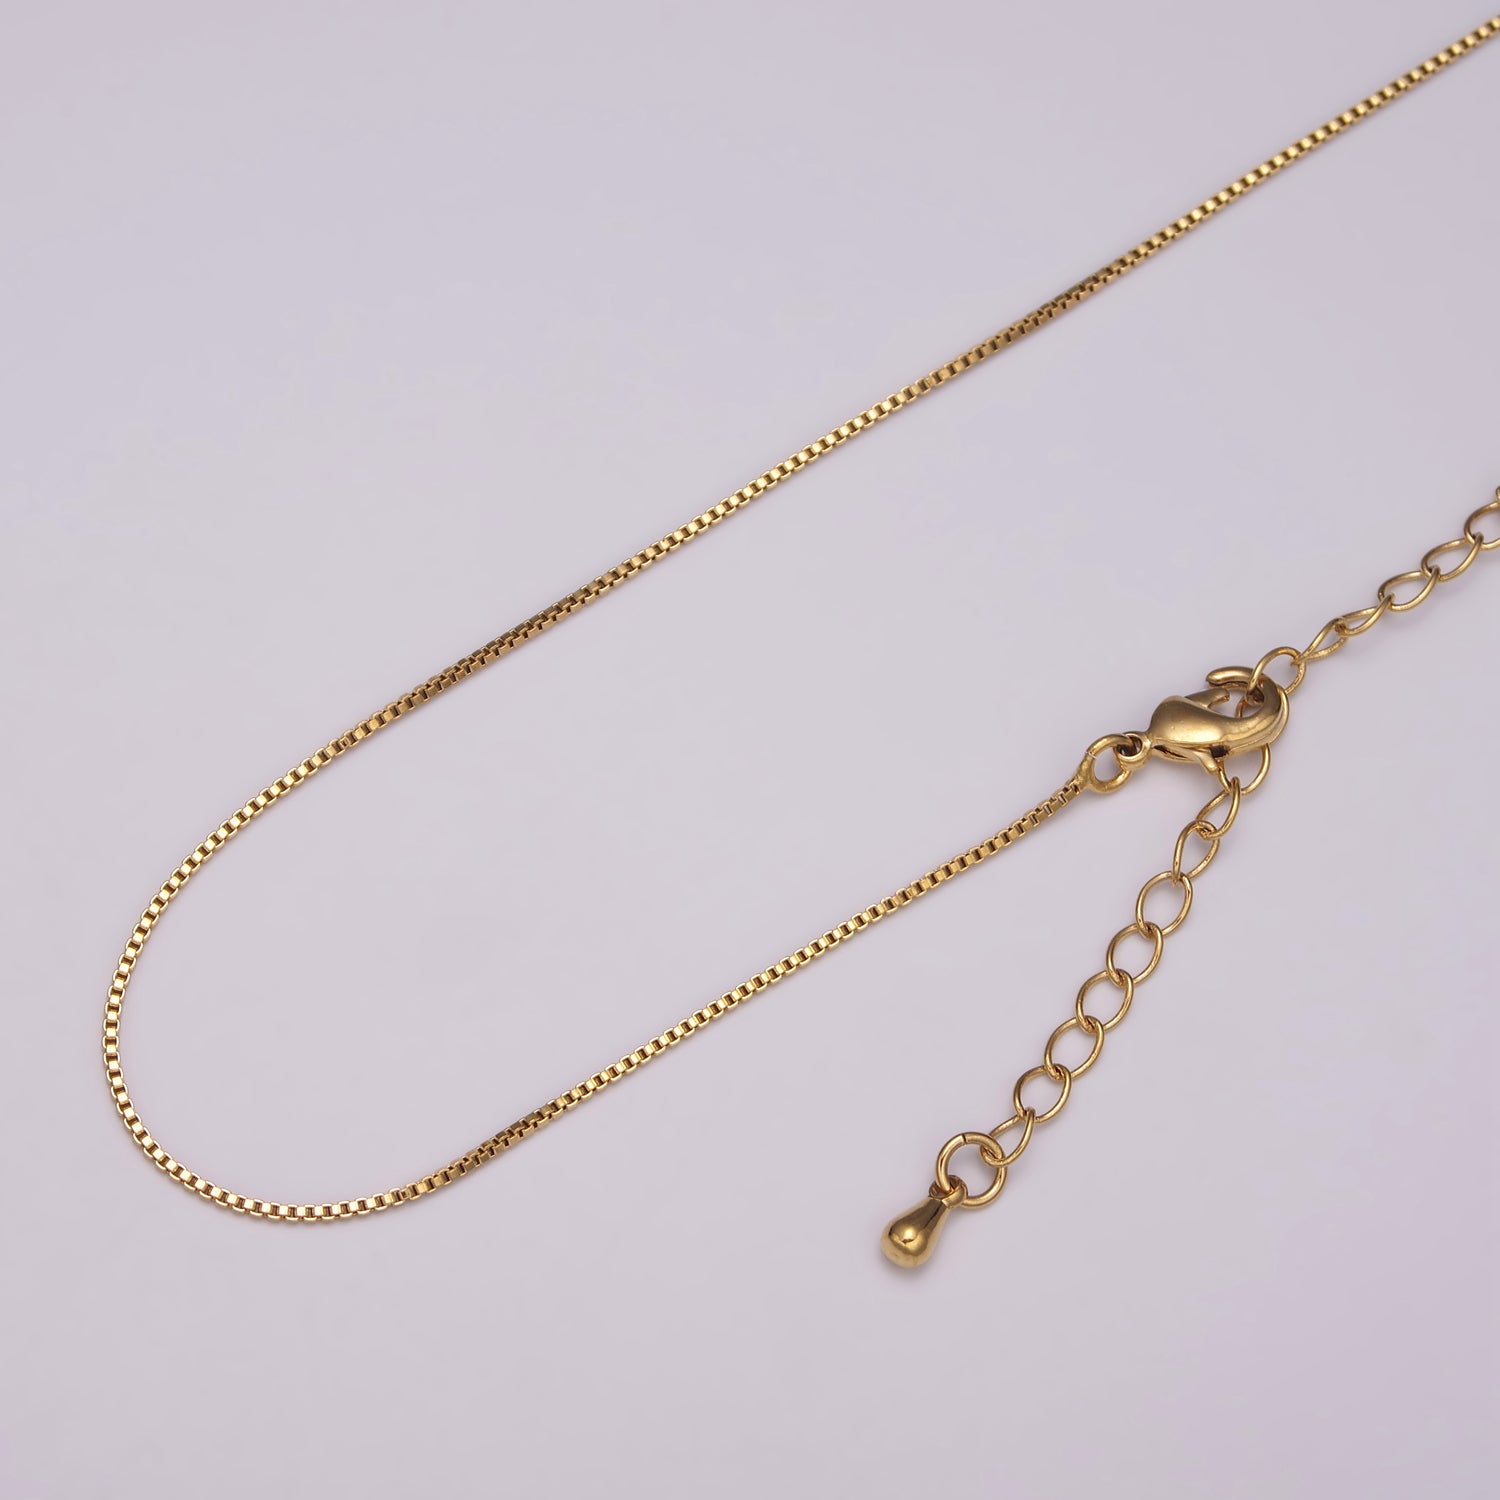 Dainty Box Chain Finished Chain For Necklace Making 0.8mm Width Box Necklace w/ Lobster Clasp - DLUXCA